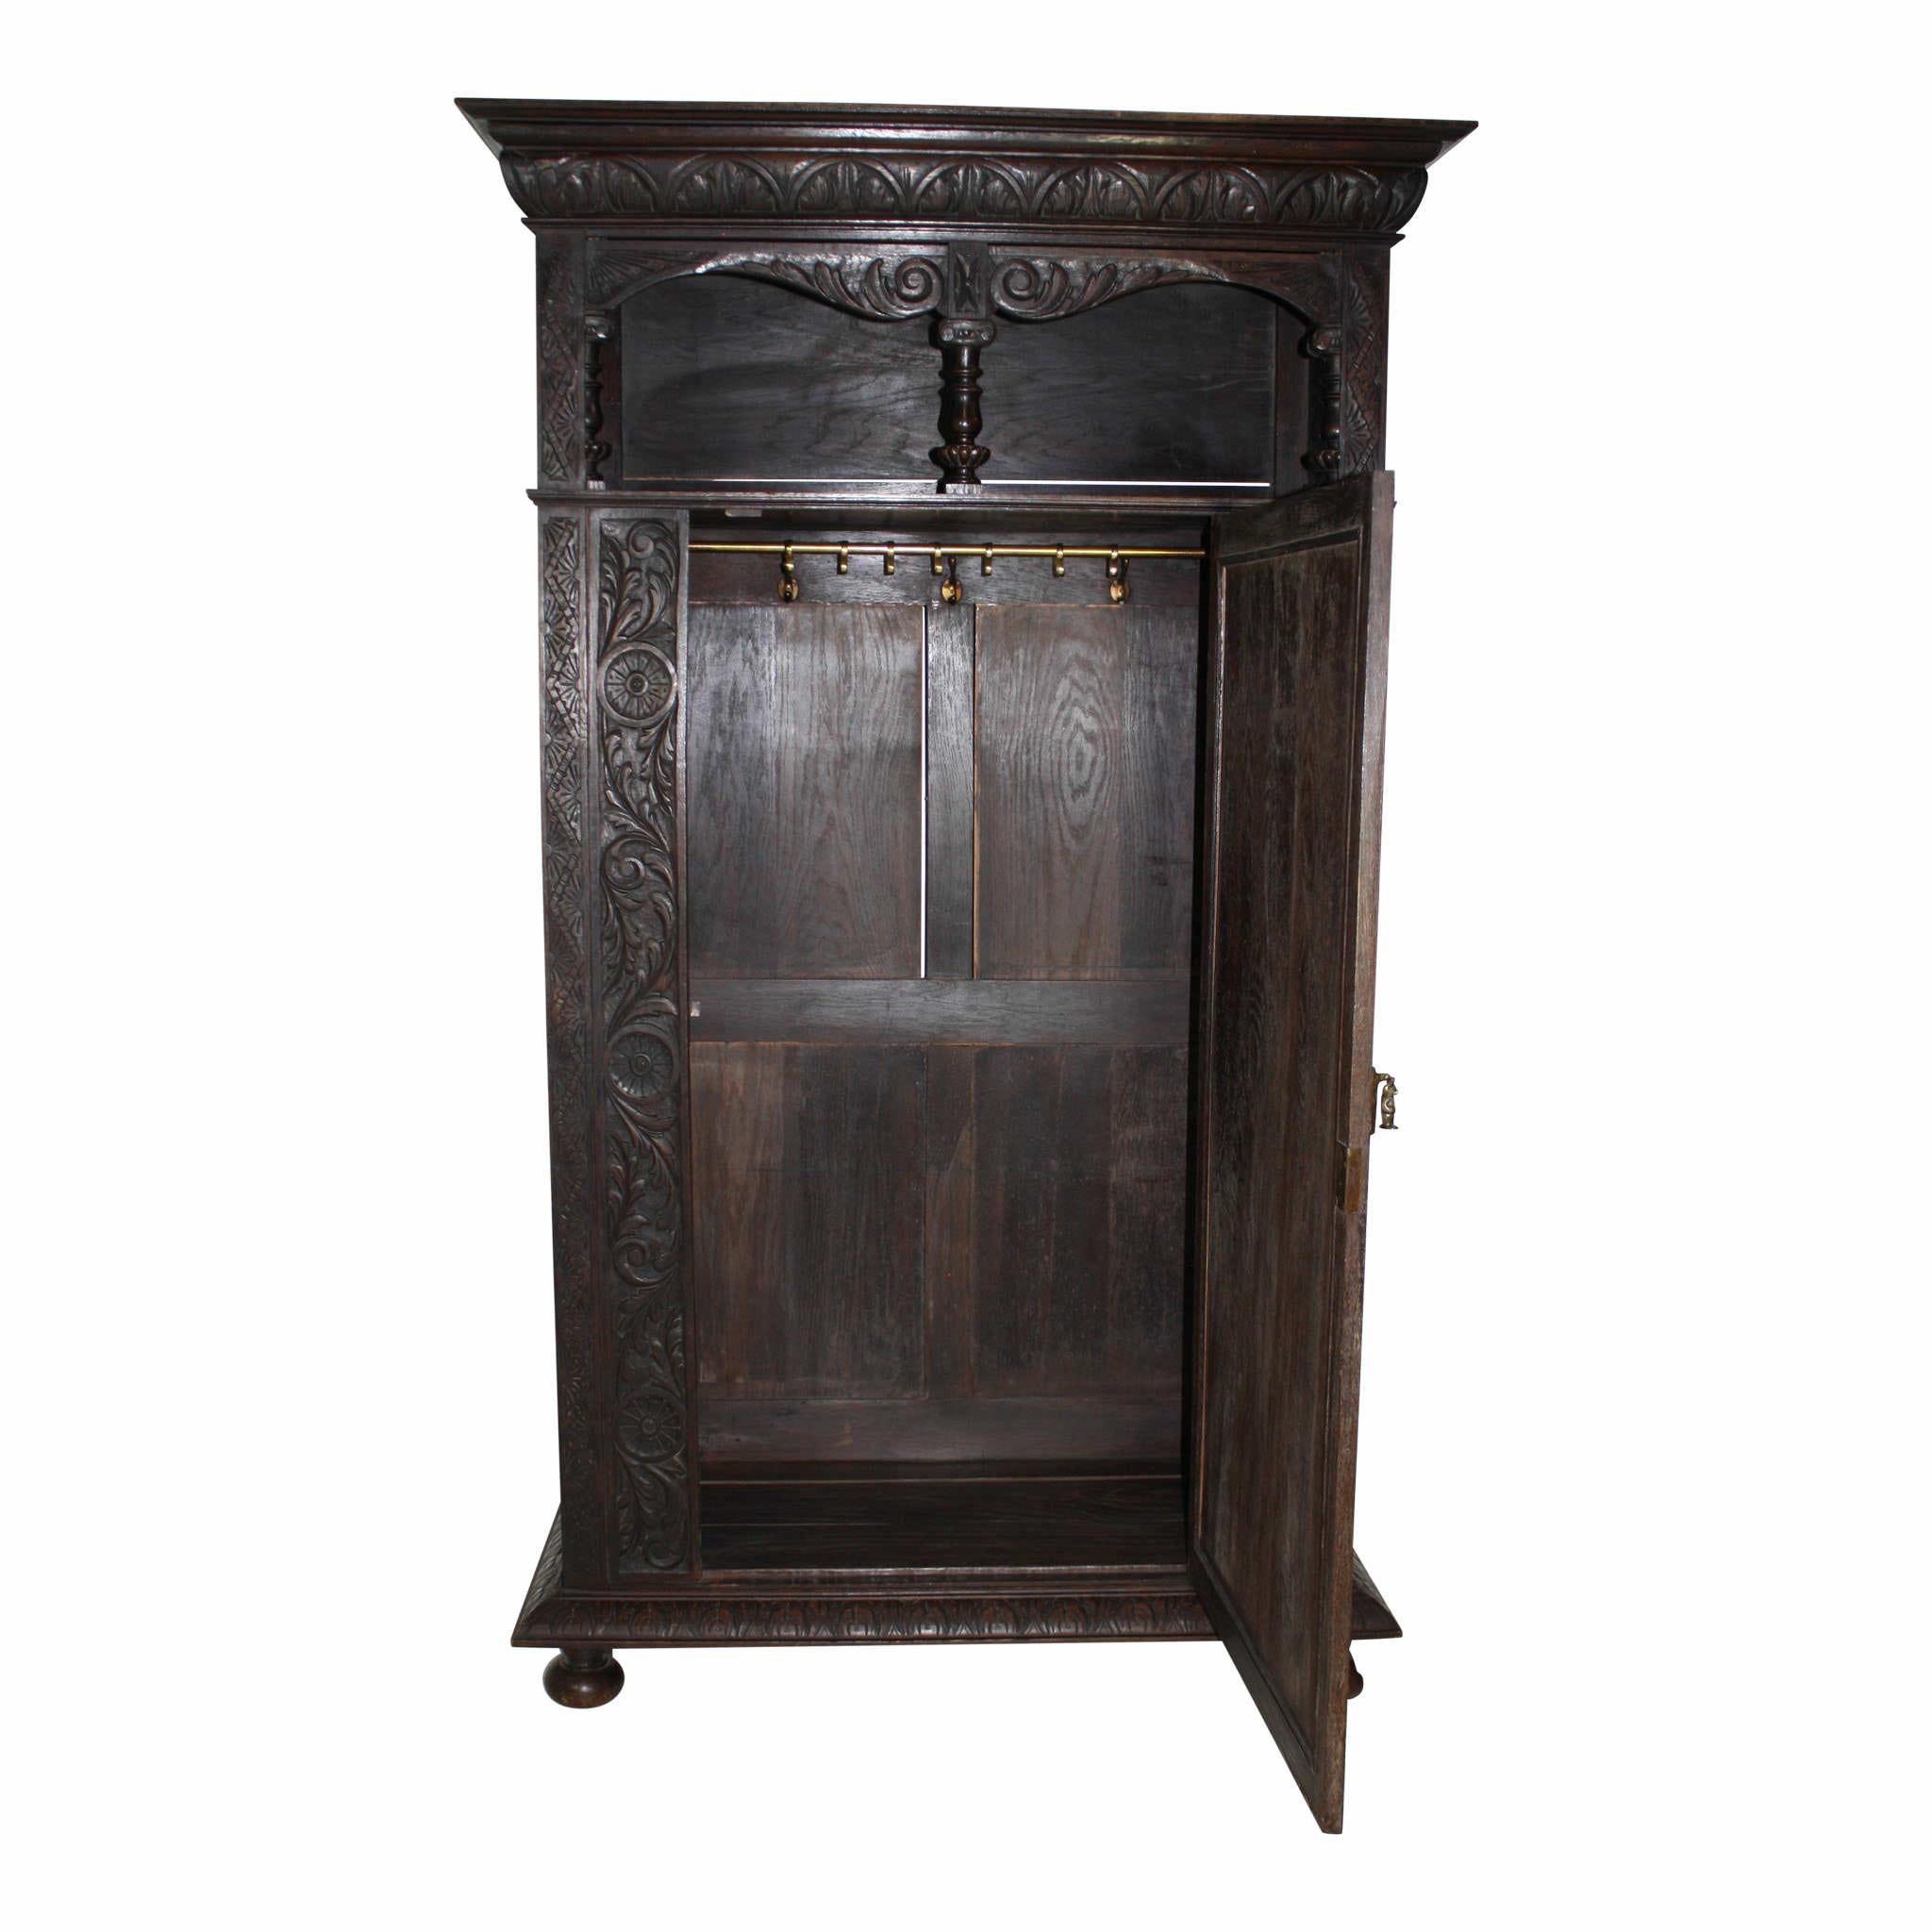 Providing generous storage and an upper display niche, this oak armoire is beautifully carved with scrolled acanthus leaves and flower heads enclosed in circles. Behind the single door, the armoire has a brass rod with seven suspended hooks. Three